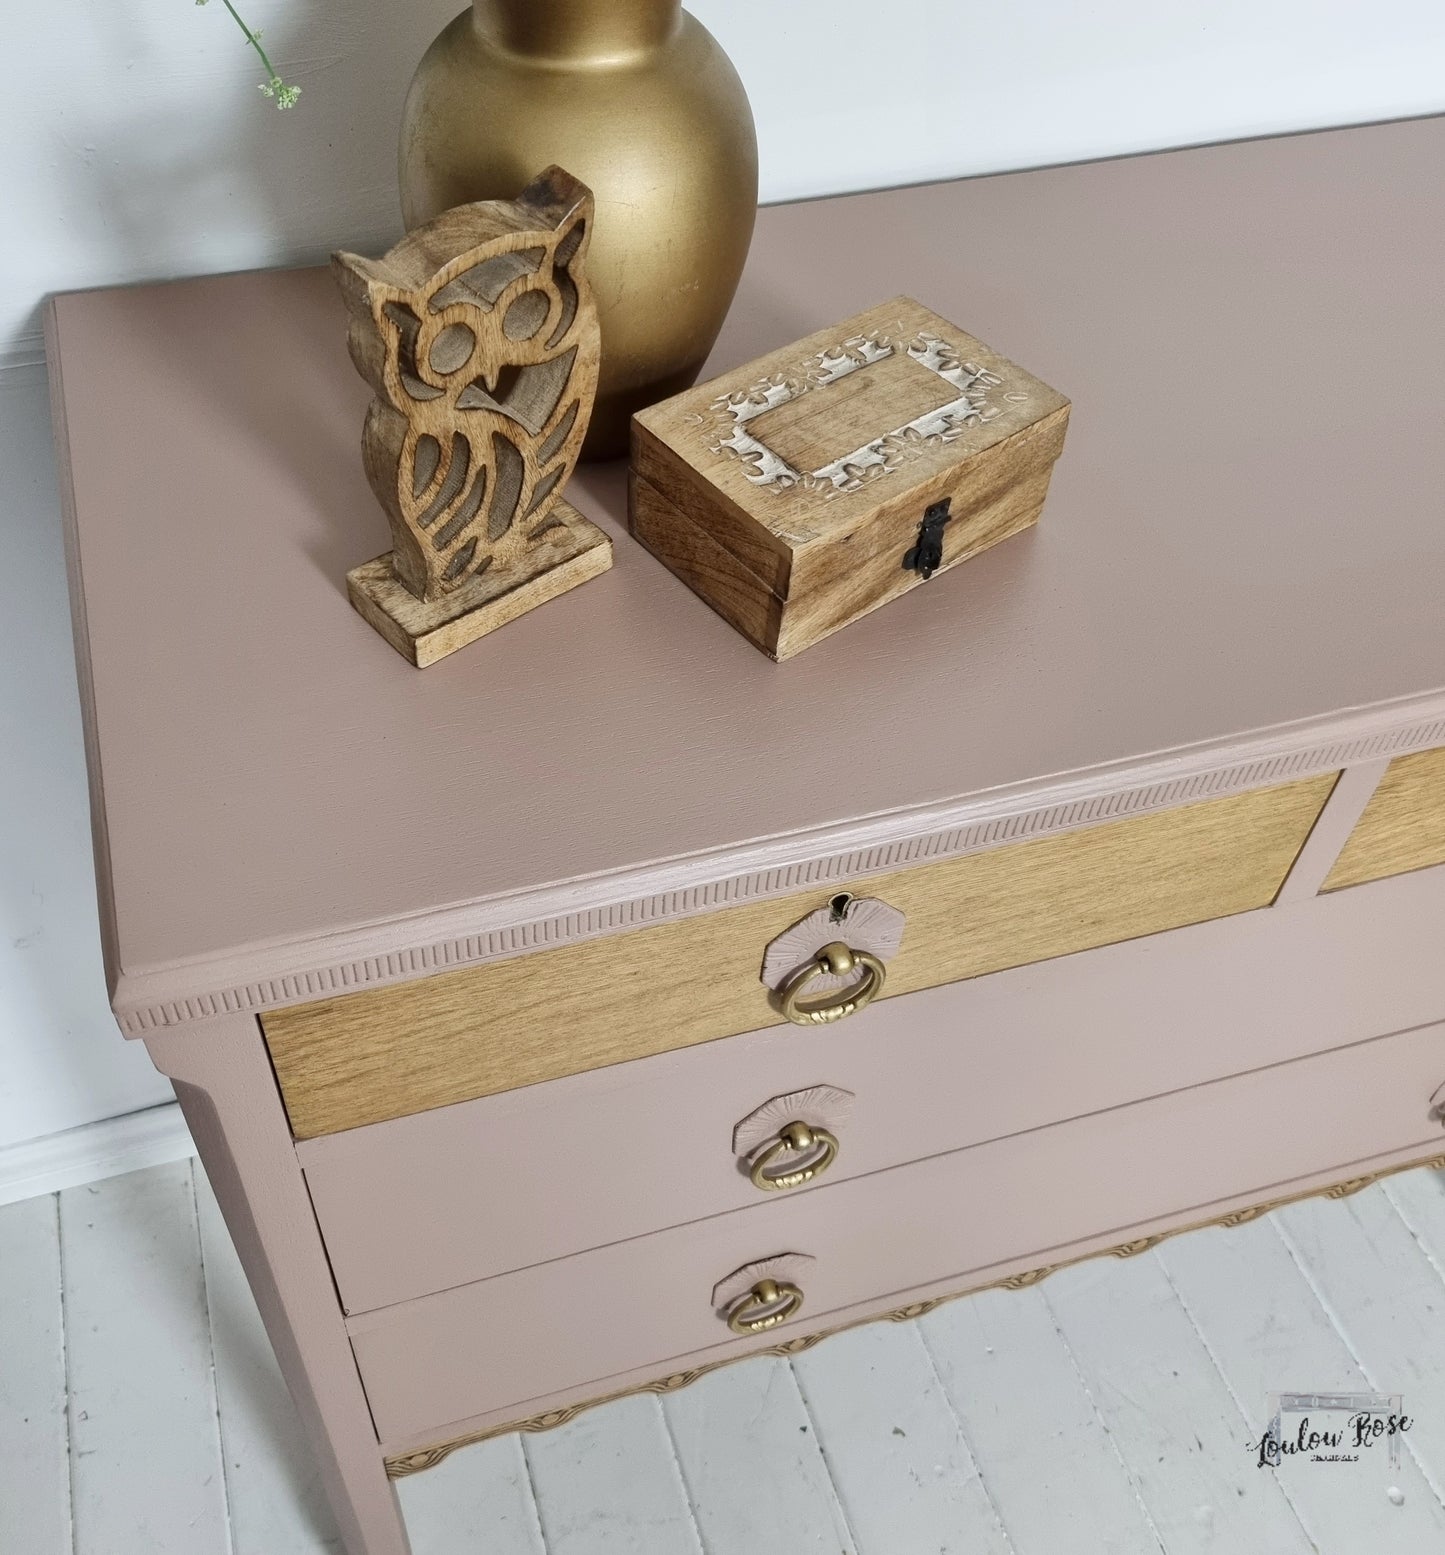 Vintage Oak Chest of Drawers Painted in Dusky Pink with Bare Wood Drawers and Carved Detail